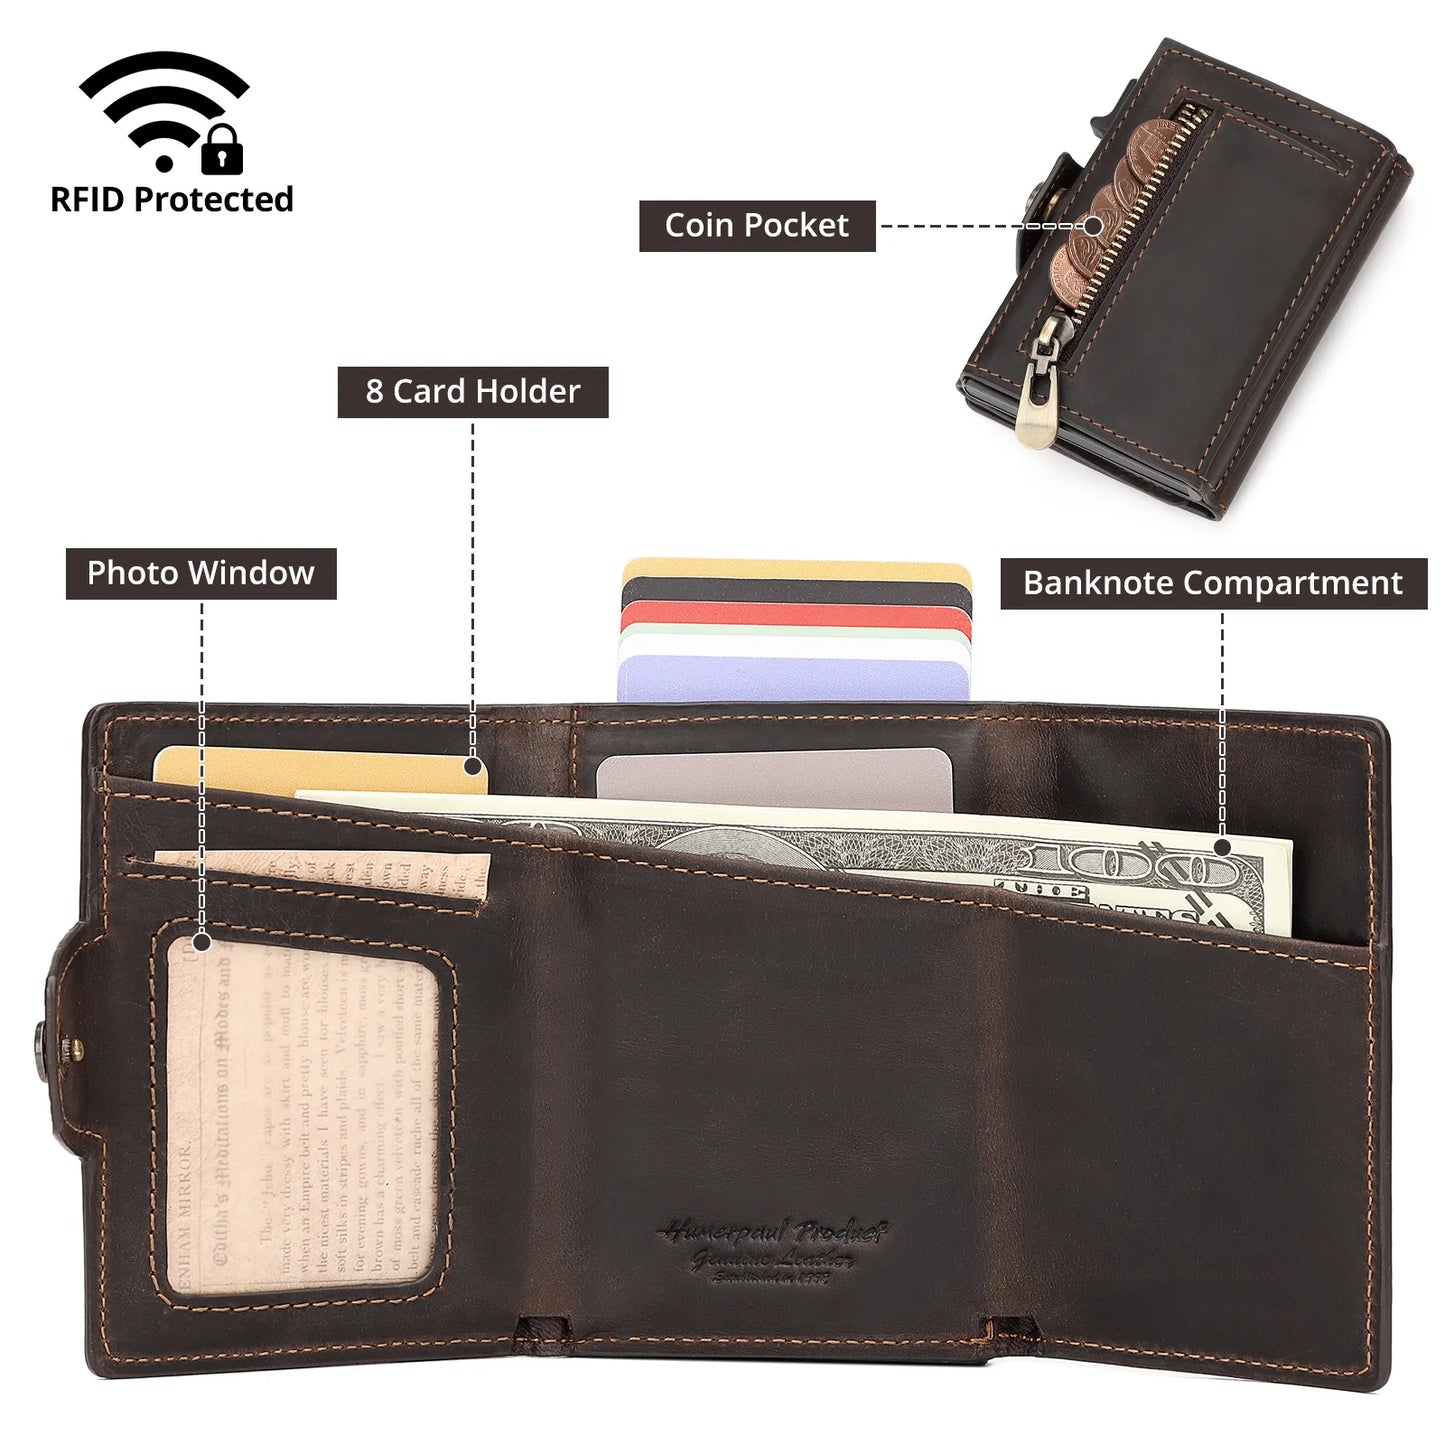 HUMERPAUL Wallet for Apple Airtage RFID Blocking Card Holder